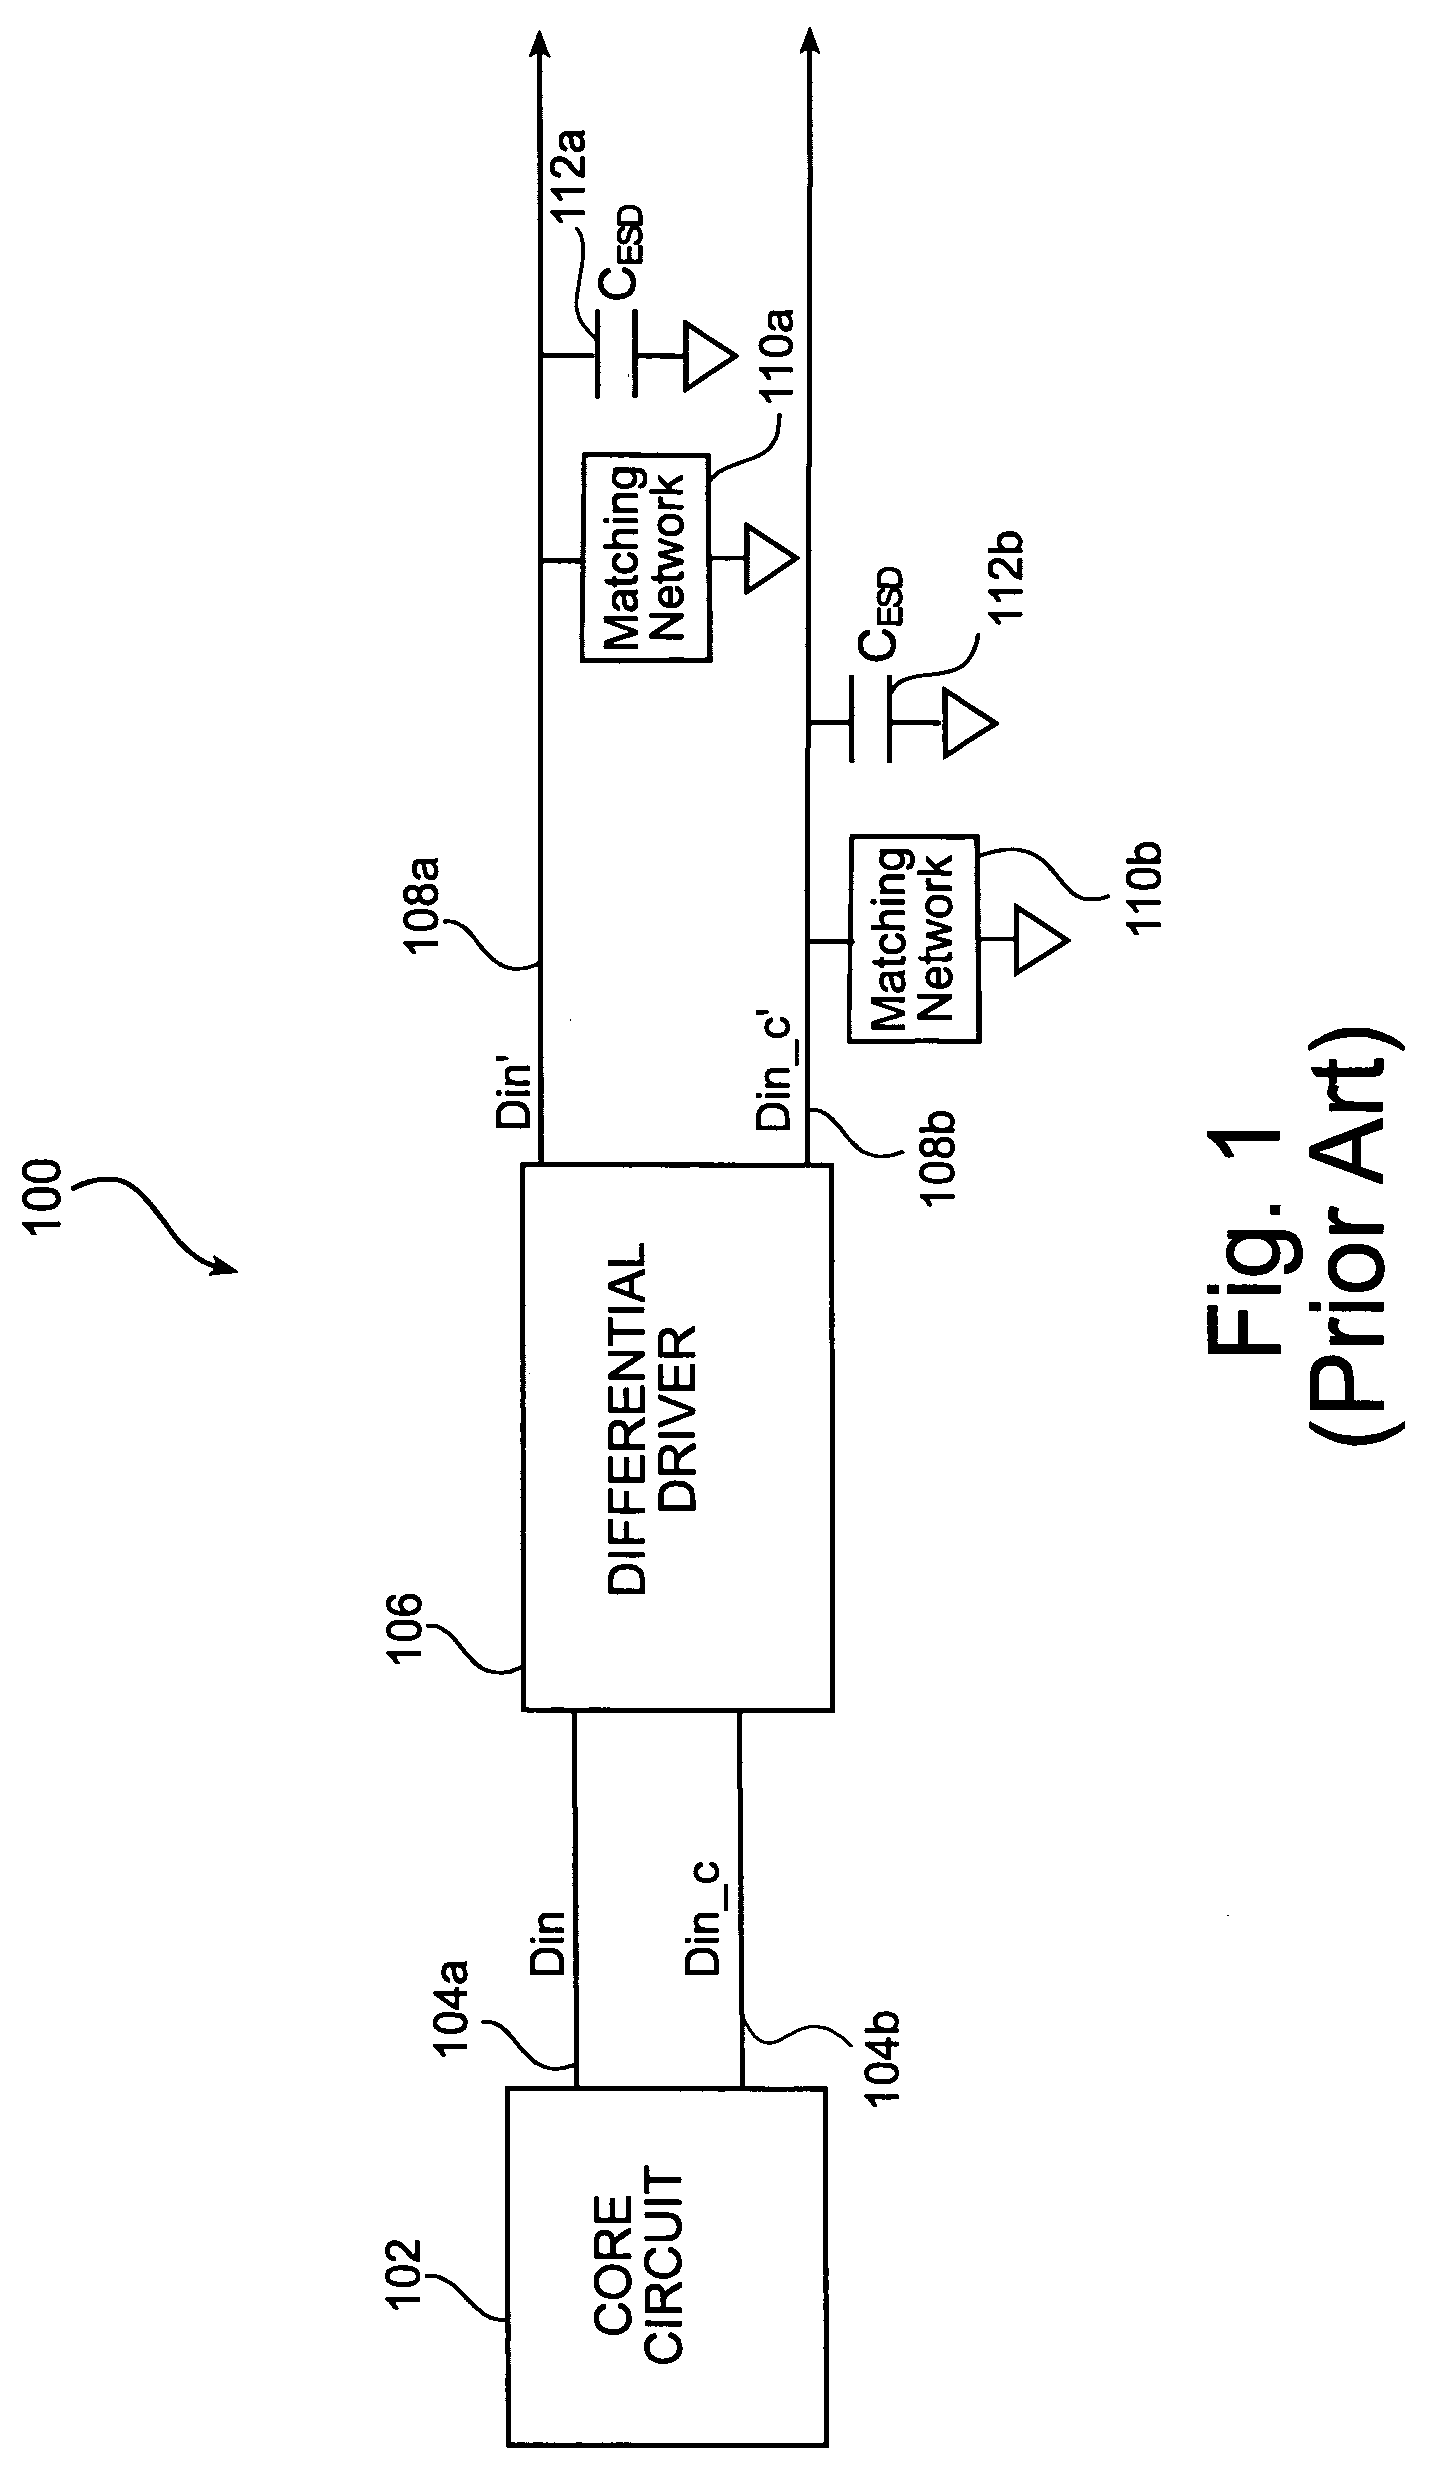 Methods and systems for rise-time improvements in differential signal outputs